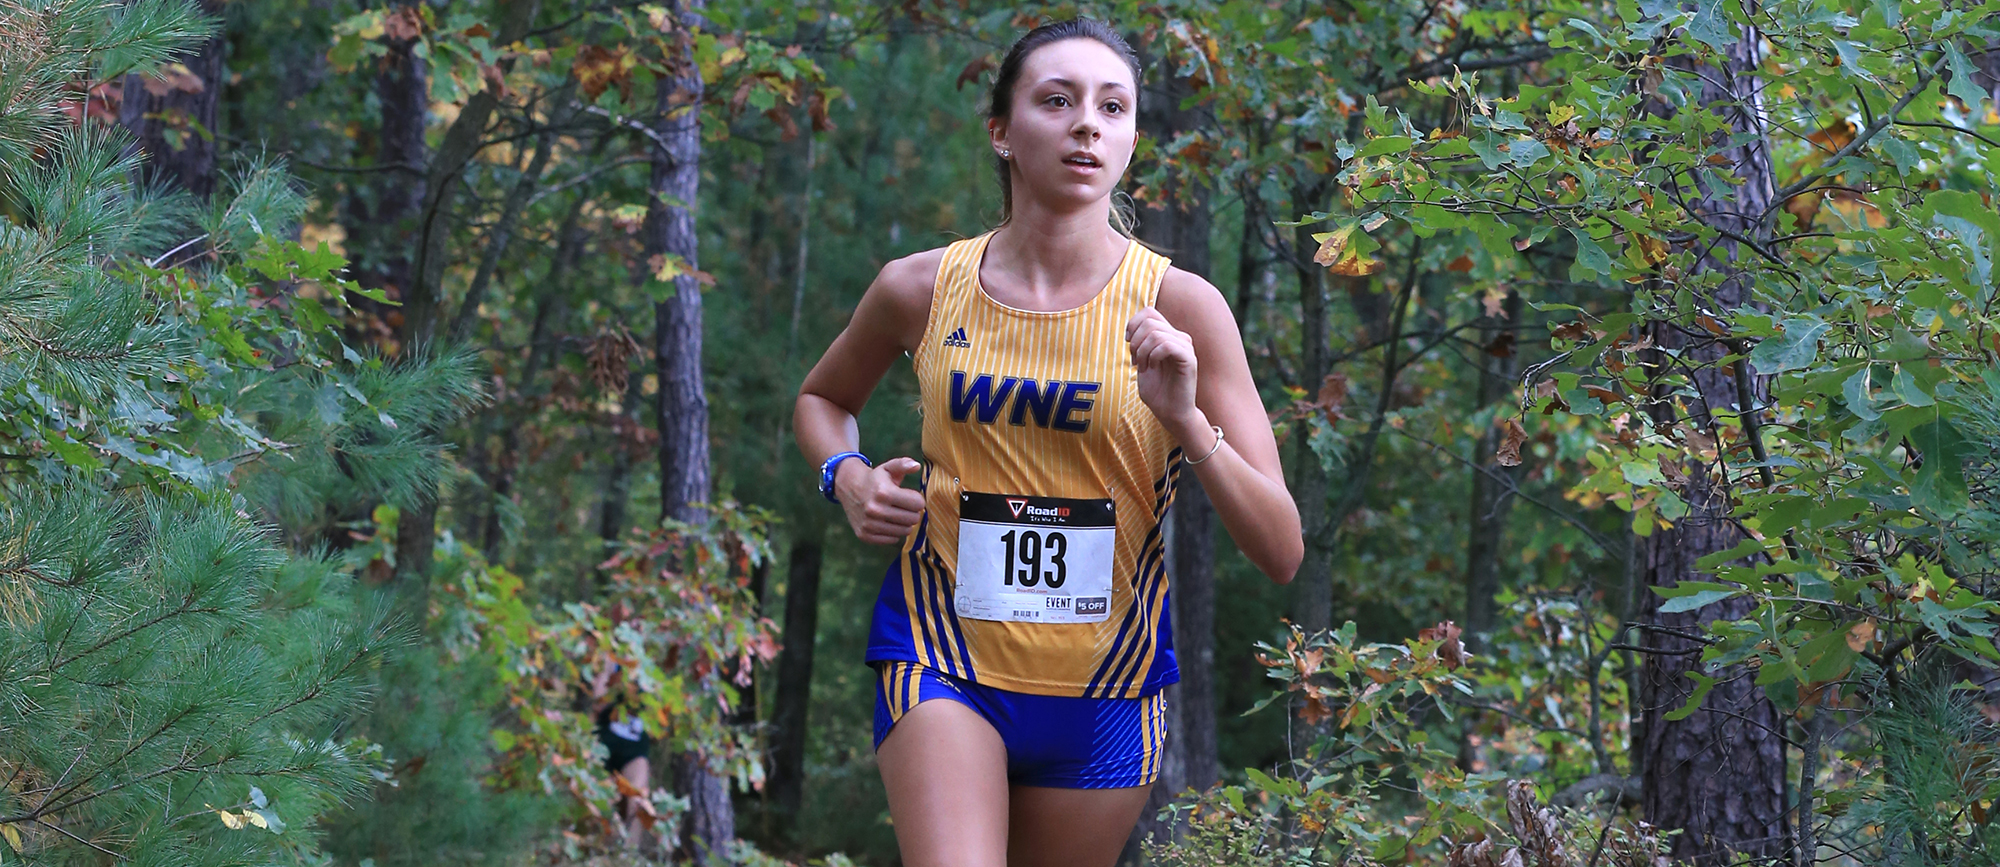 Junior Meagan Dias earned All-CCC honors for the second consecutive season with her seventh place finish (24:57.8) at the CCC Championship on Saturday (Photo by Doug Steinbock).